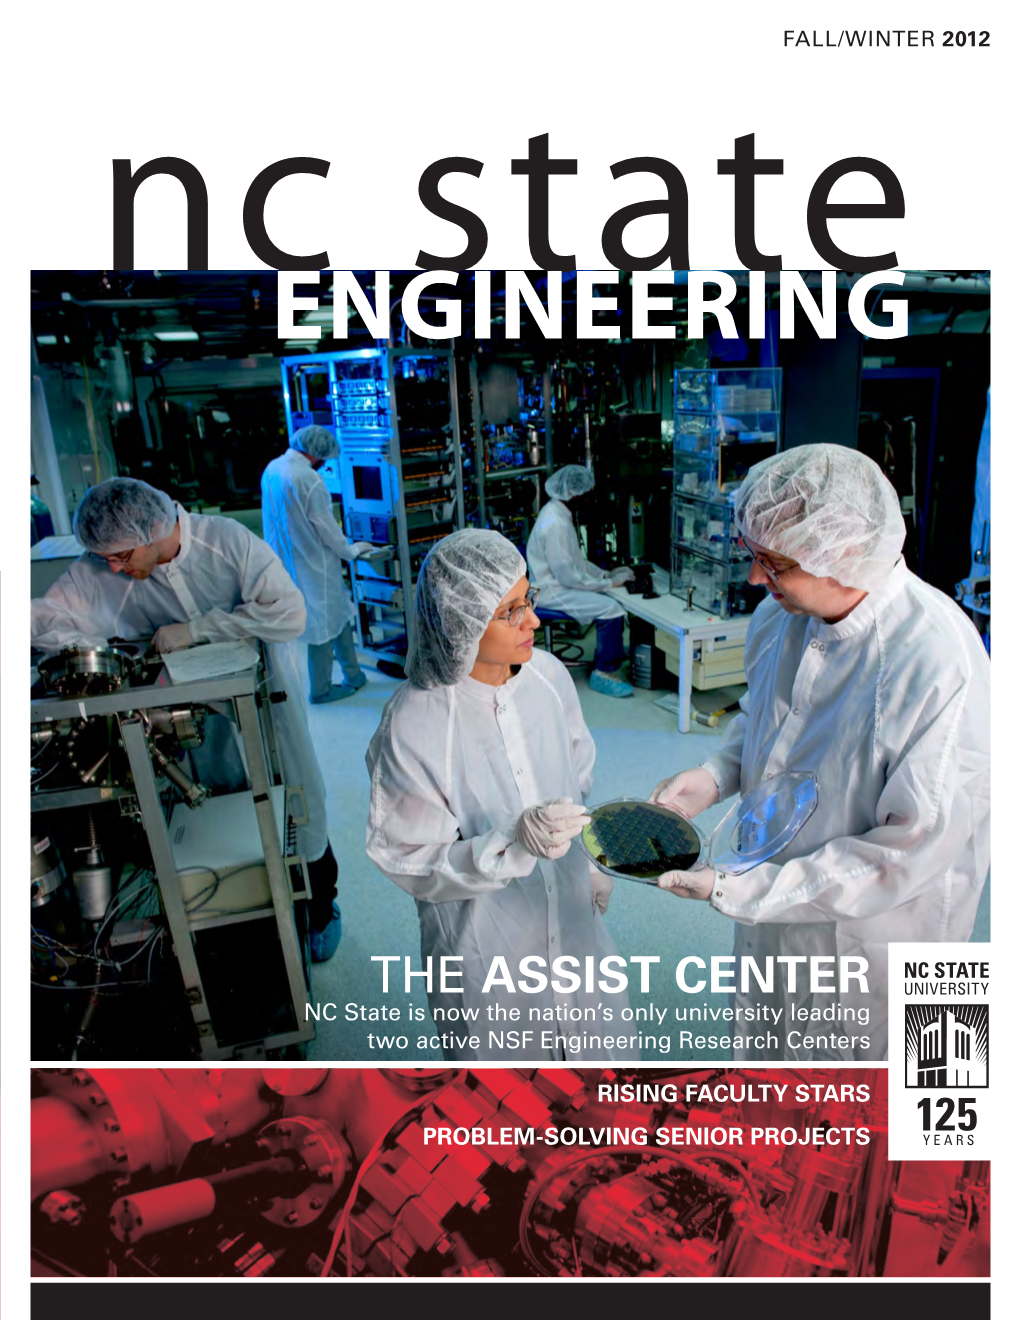 THE ASSIST CENTER NC State Is Now the Nation’S Only University Leading Two Active NSF Engineering Research Centers